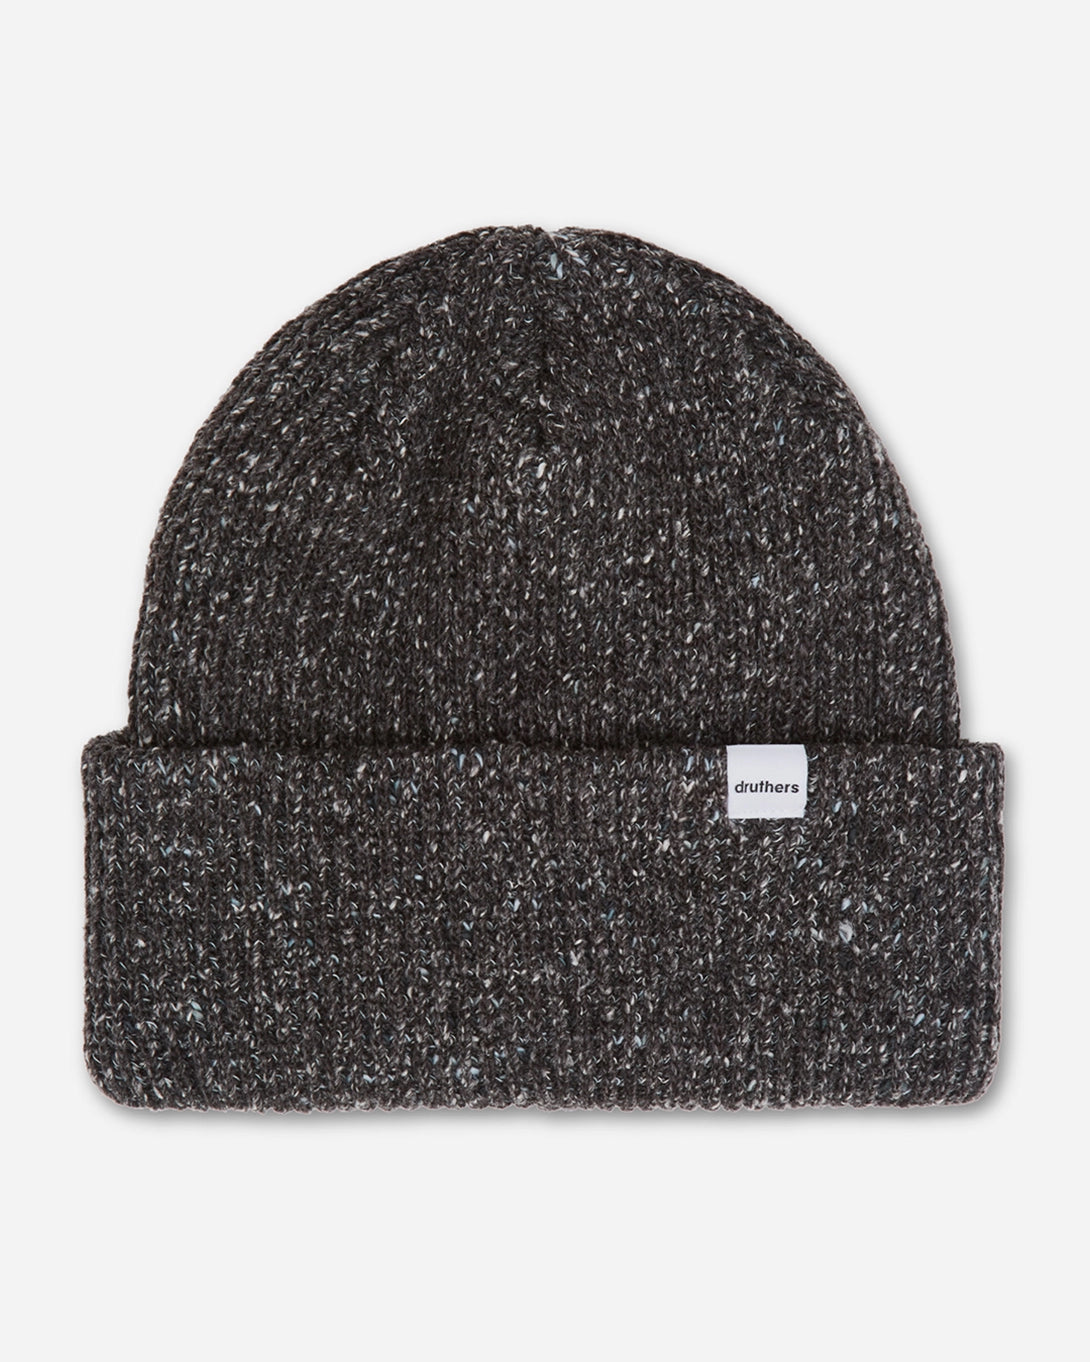 Charcoal Melange Recycled Cotton Melange Beanie Druthers O.N.S